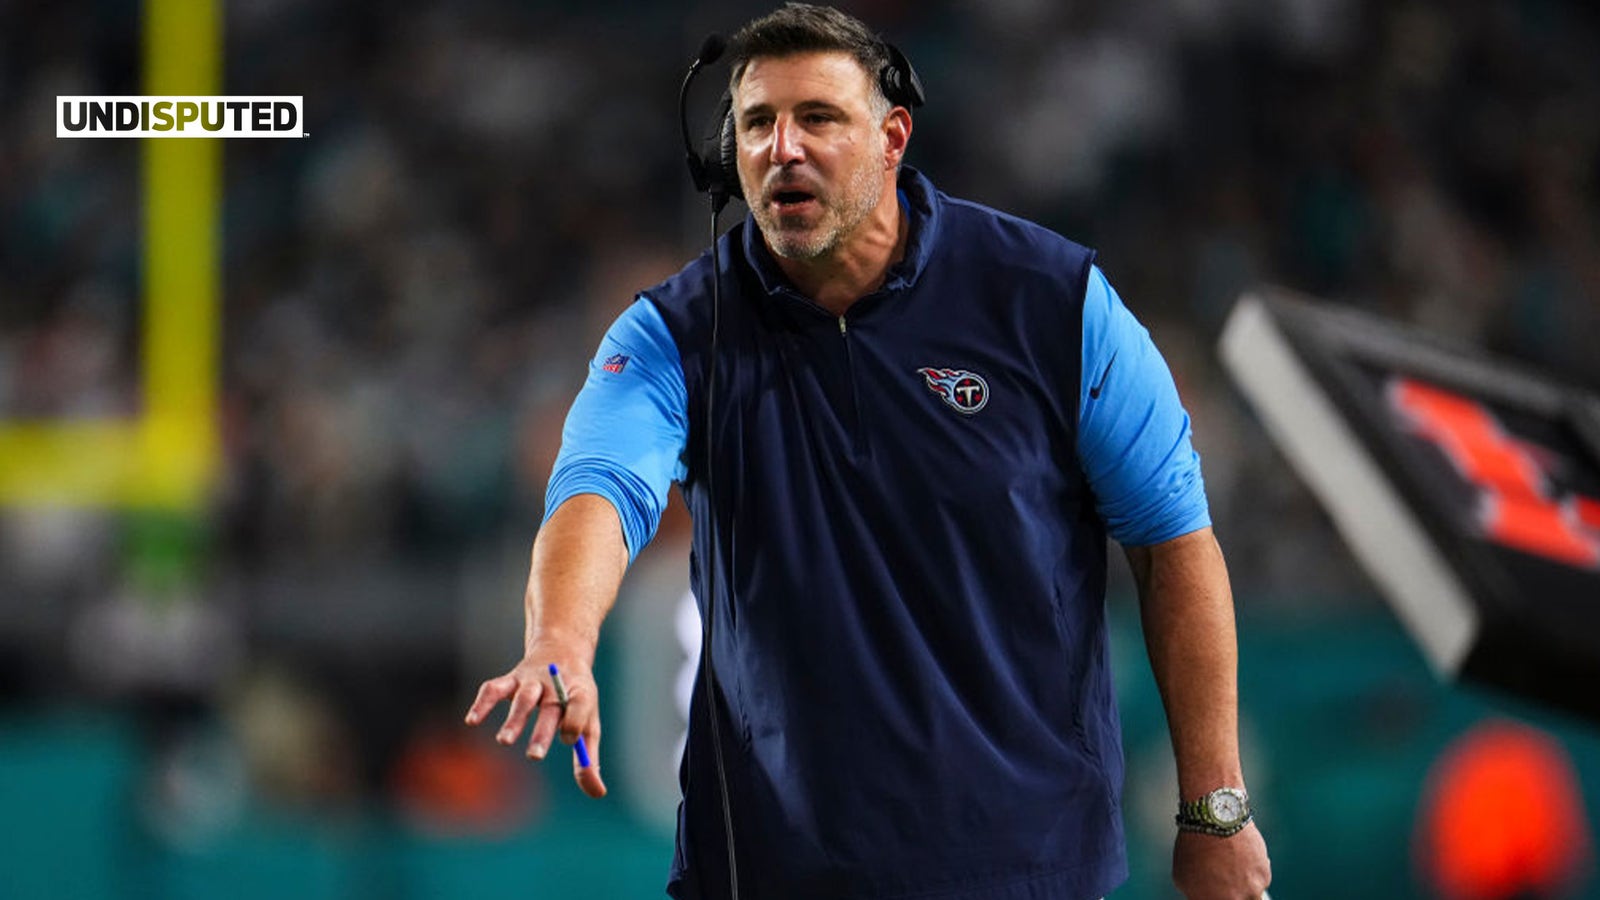 Skip Bayless, Richard Sherman and Michael Irvin react to Titans firing head coach Mike Vrabel after six seasons